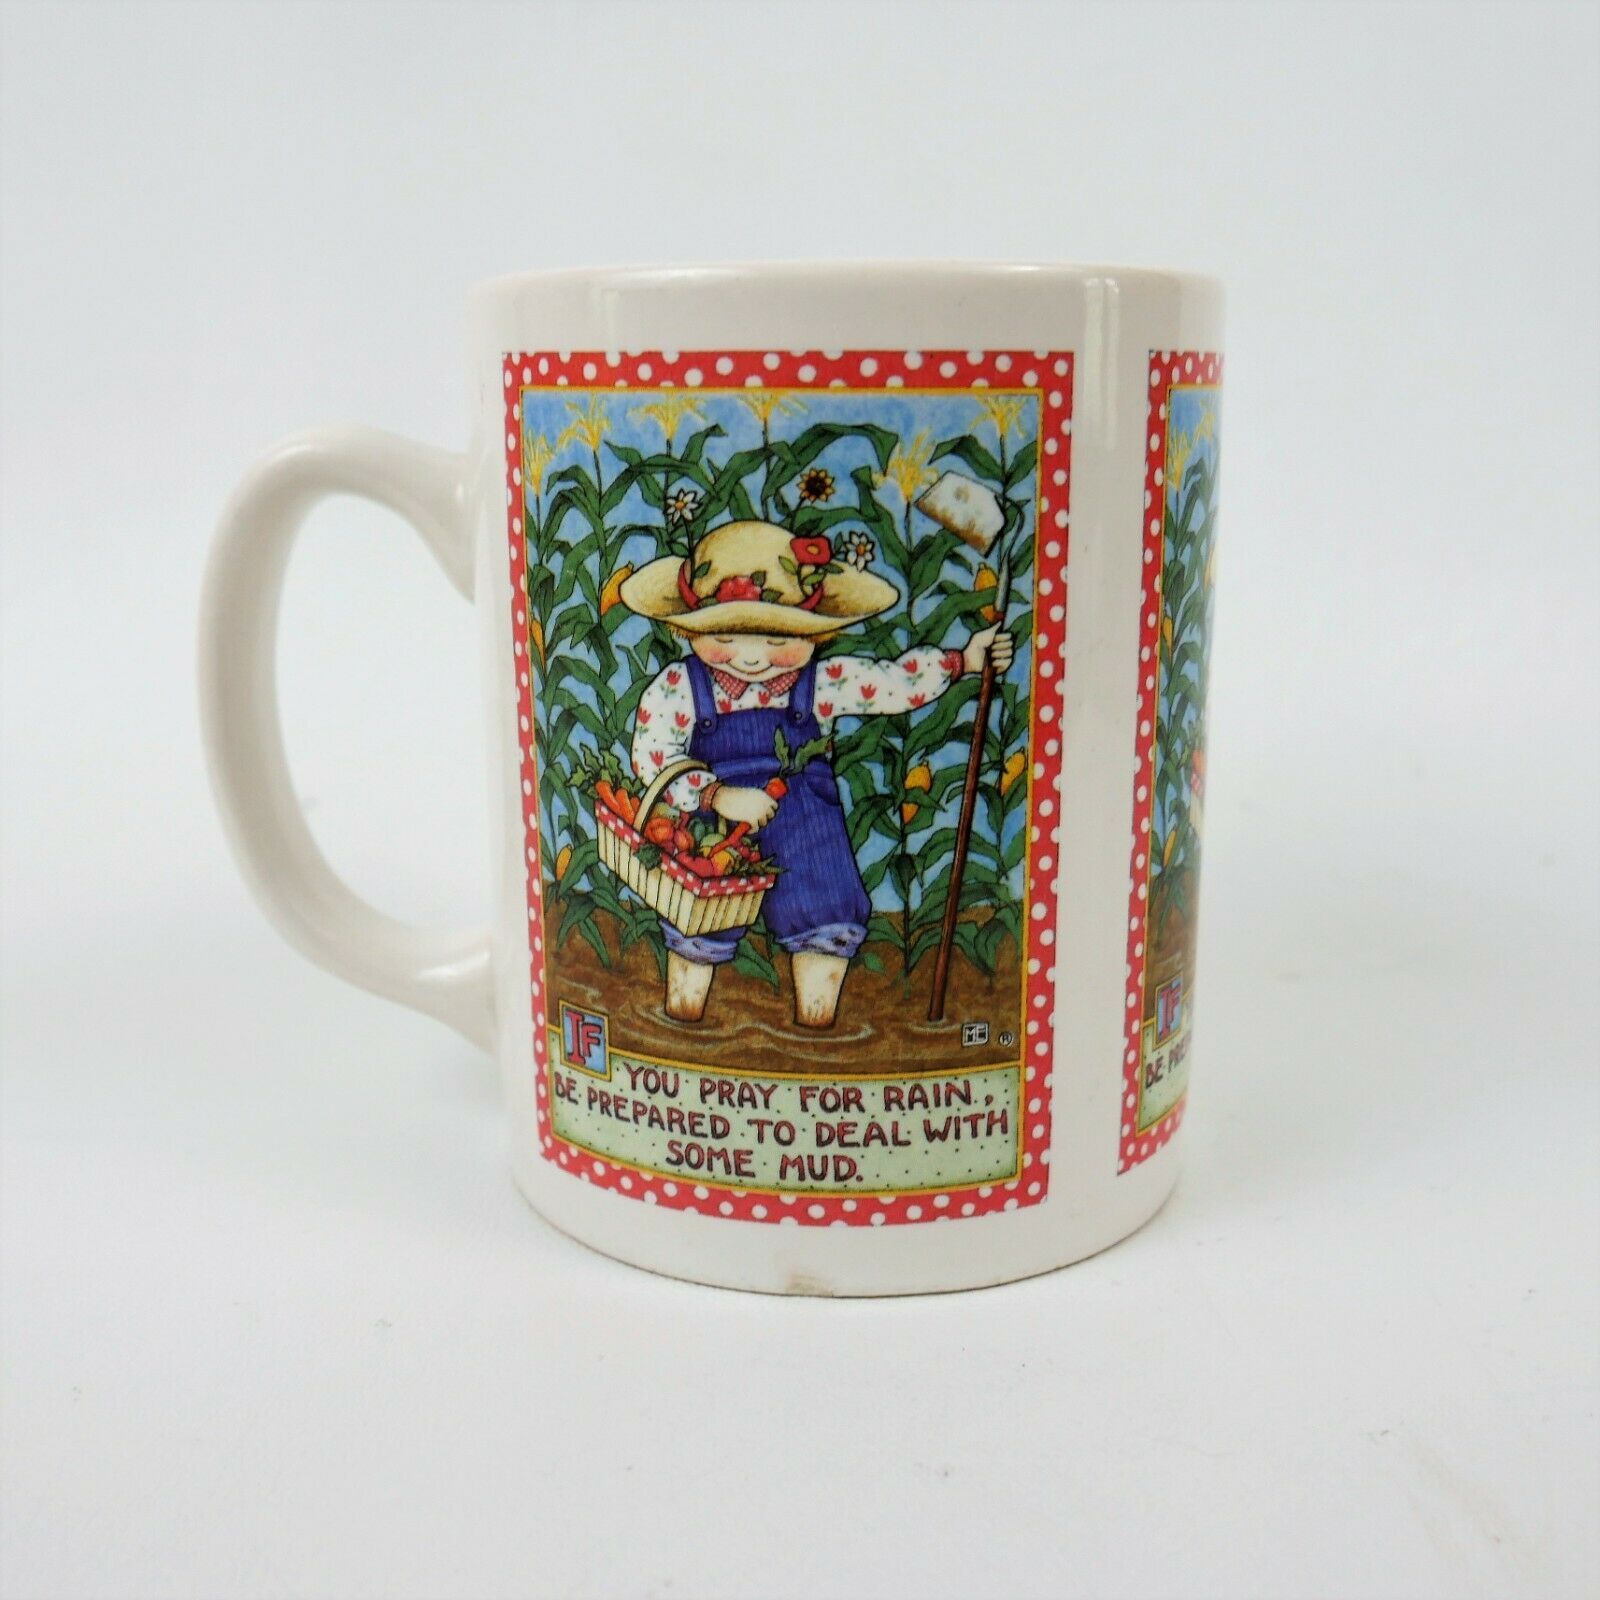 Mary Englebreit If You Pray for Rain Be Prepared to Deal with Some Mud Mug - $15.85